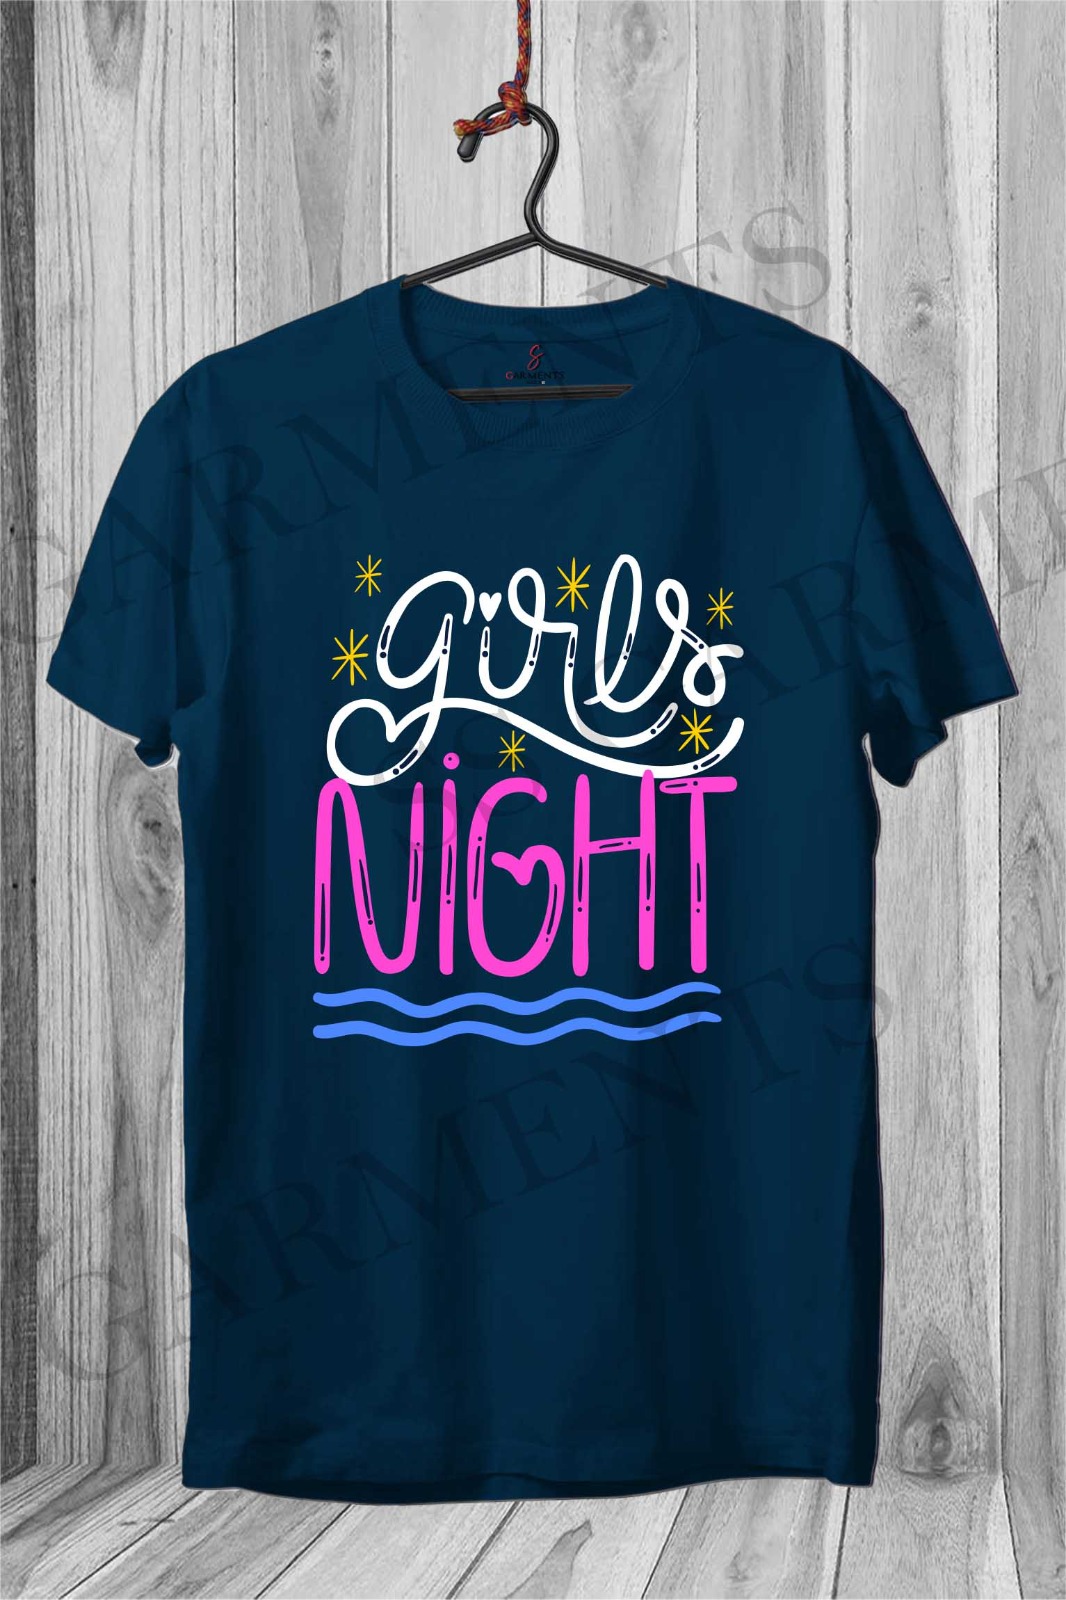 Printed T shirt Night Suit for Women